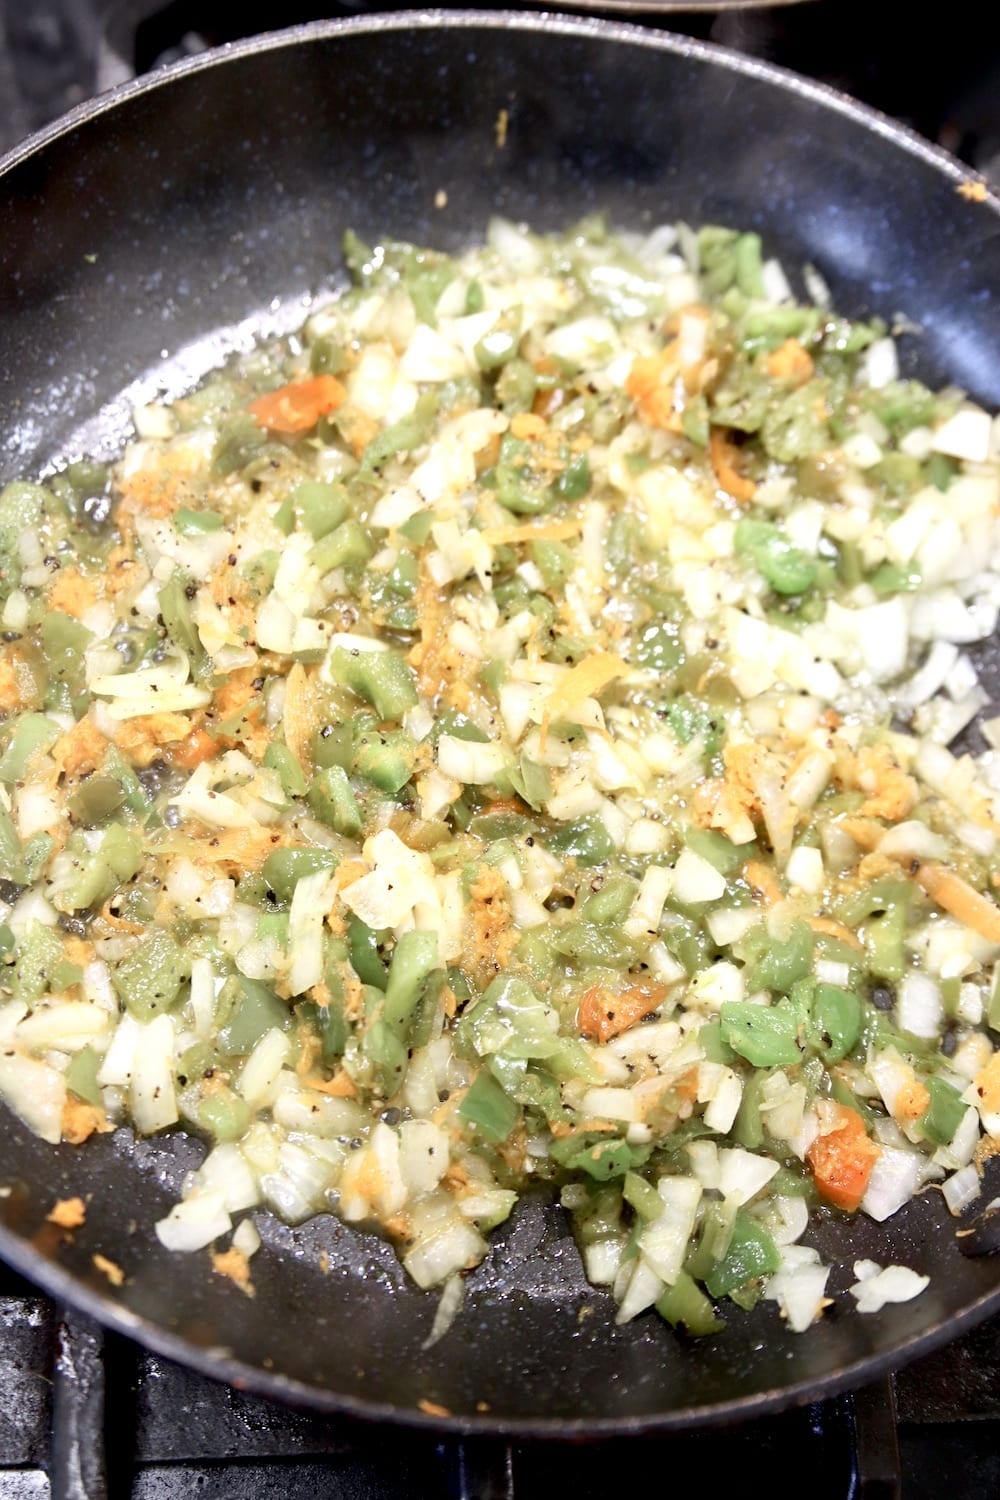 onions, bell peppers, carrots in a skillet